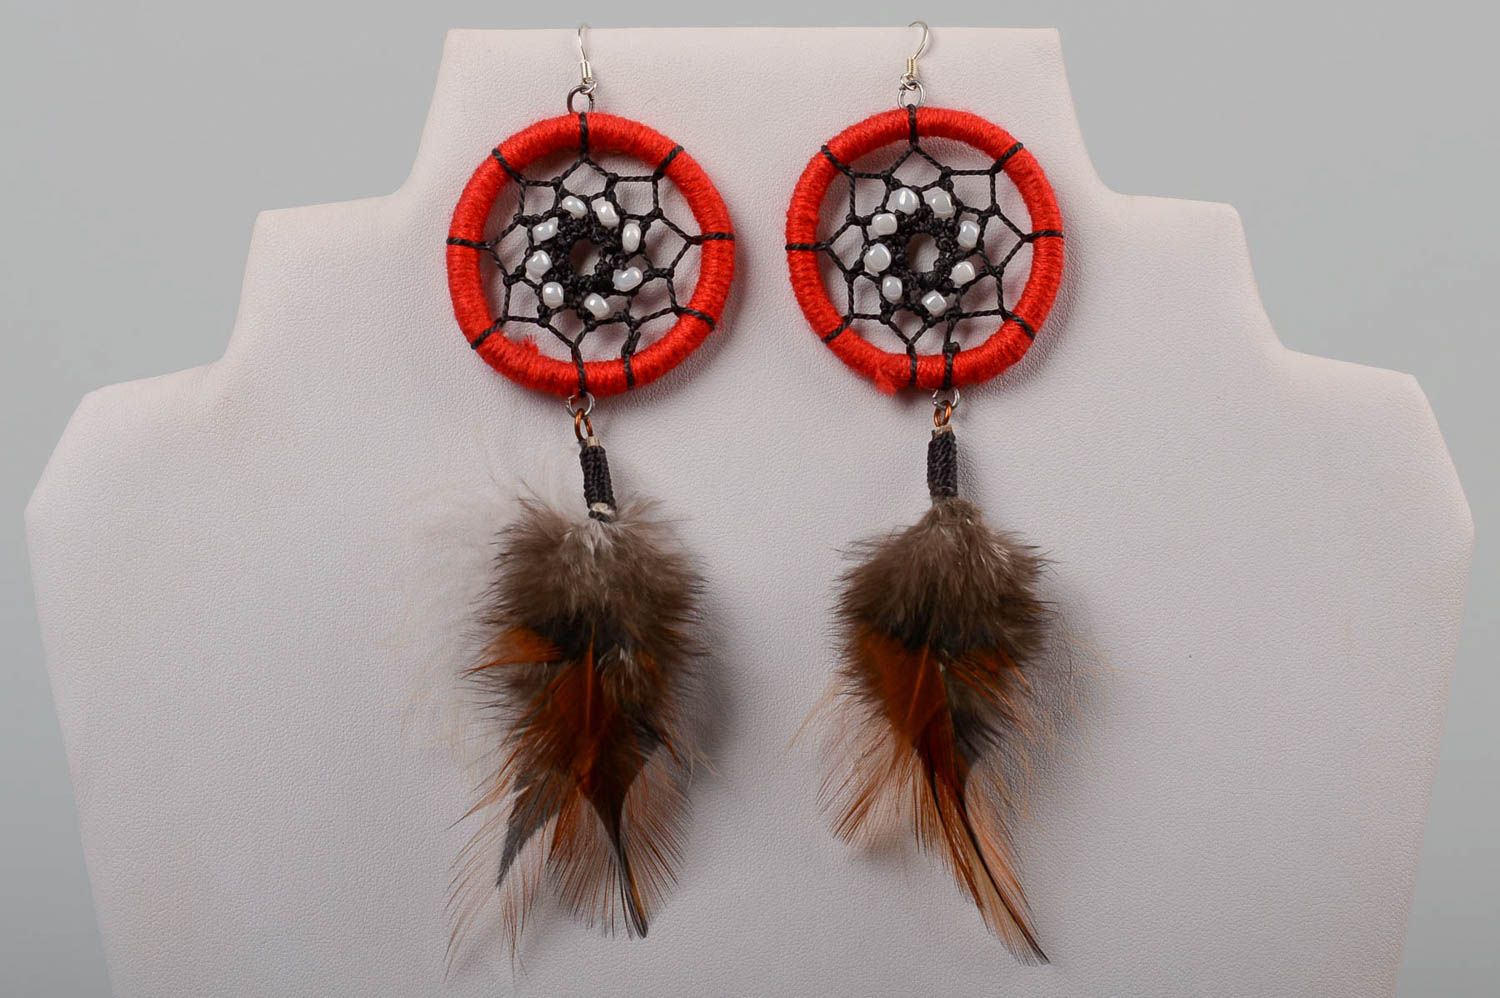 Handmade earrings dreamcatcher earrings for women unique jewelry gifts for her photo 4